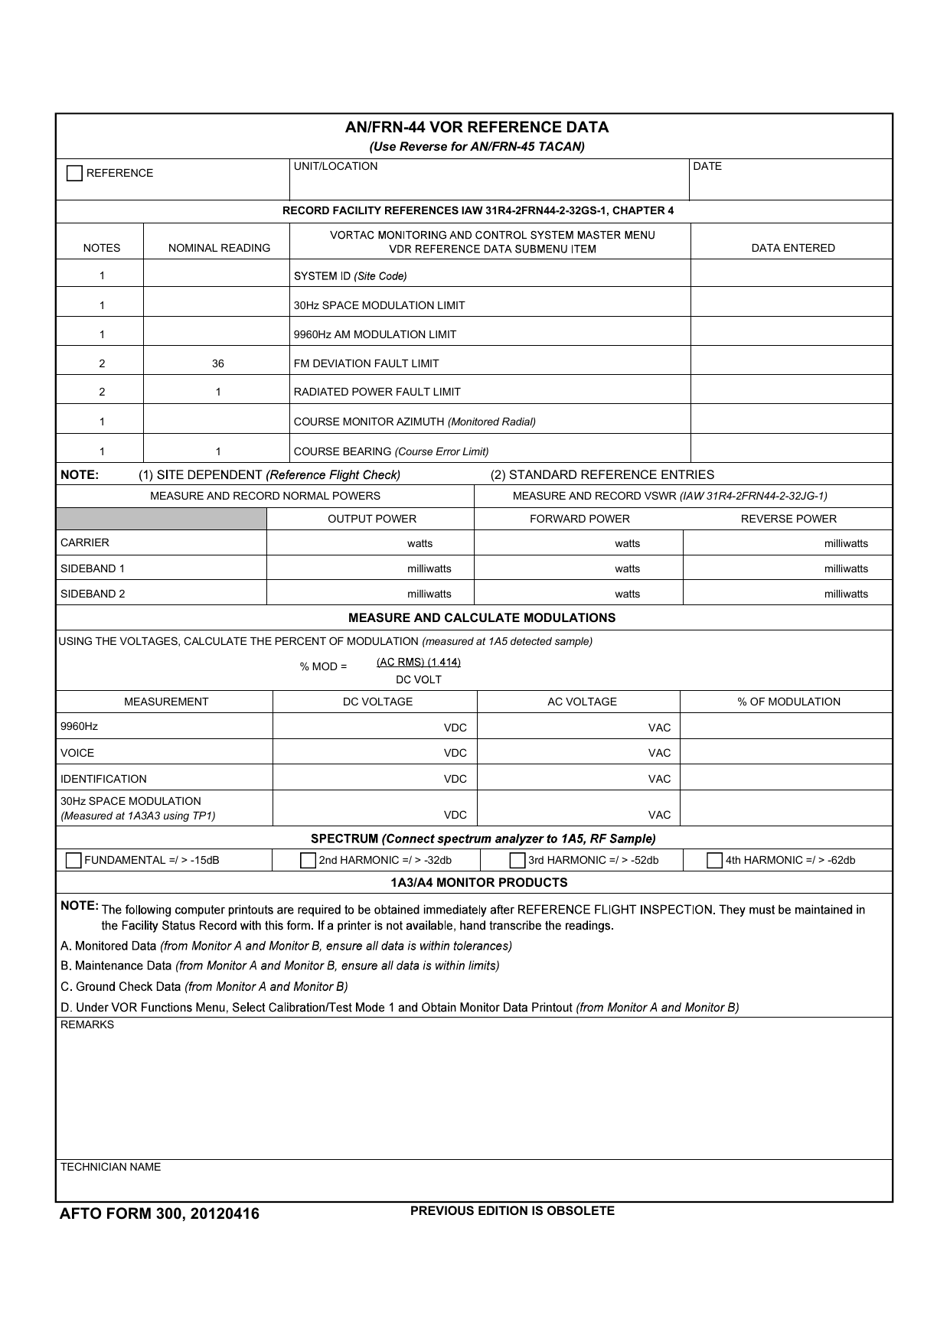 AFTO Form 300 An / Frn-44 Vor Reference Data, Page 1